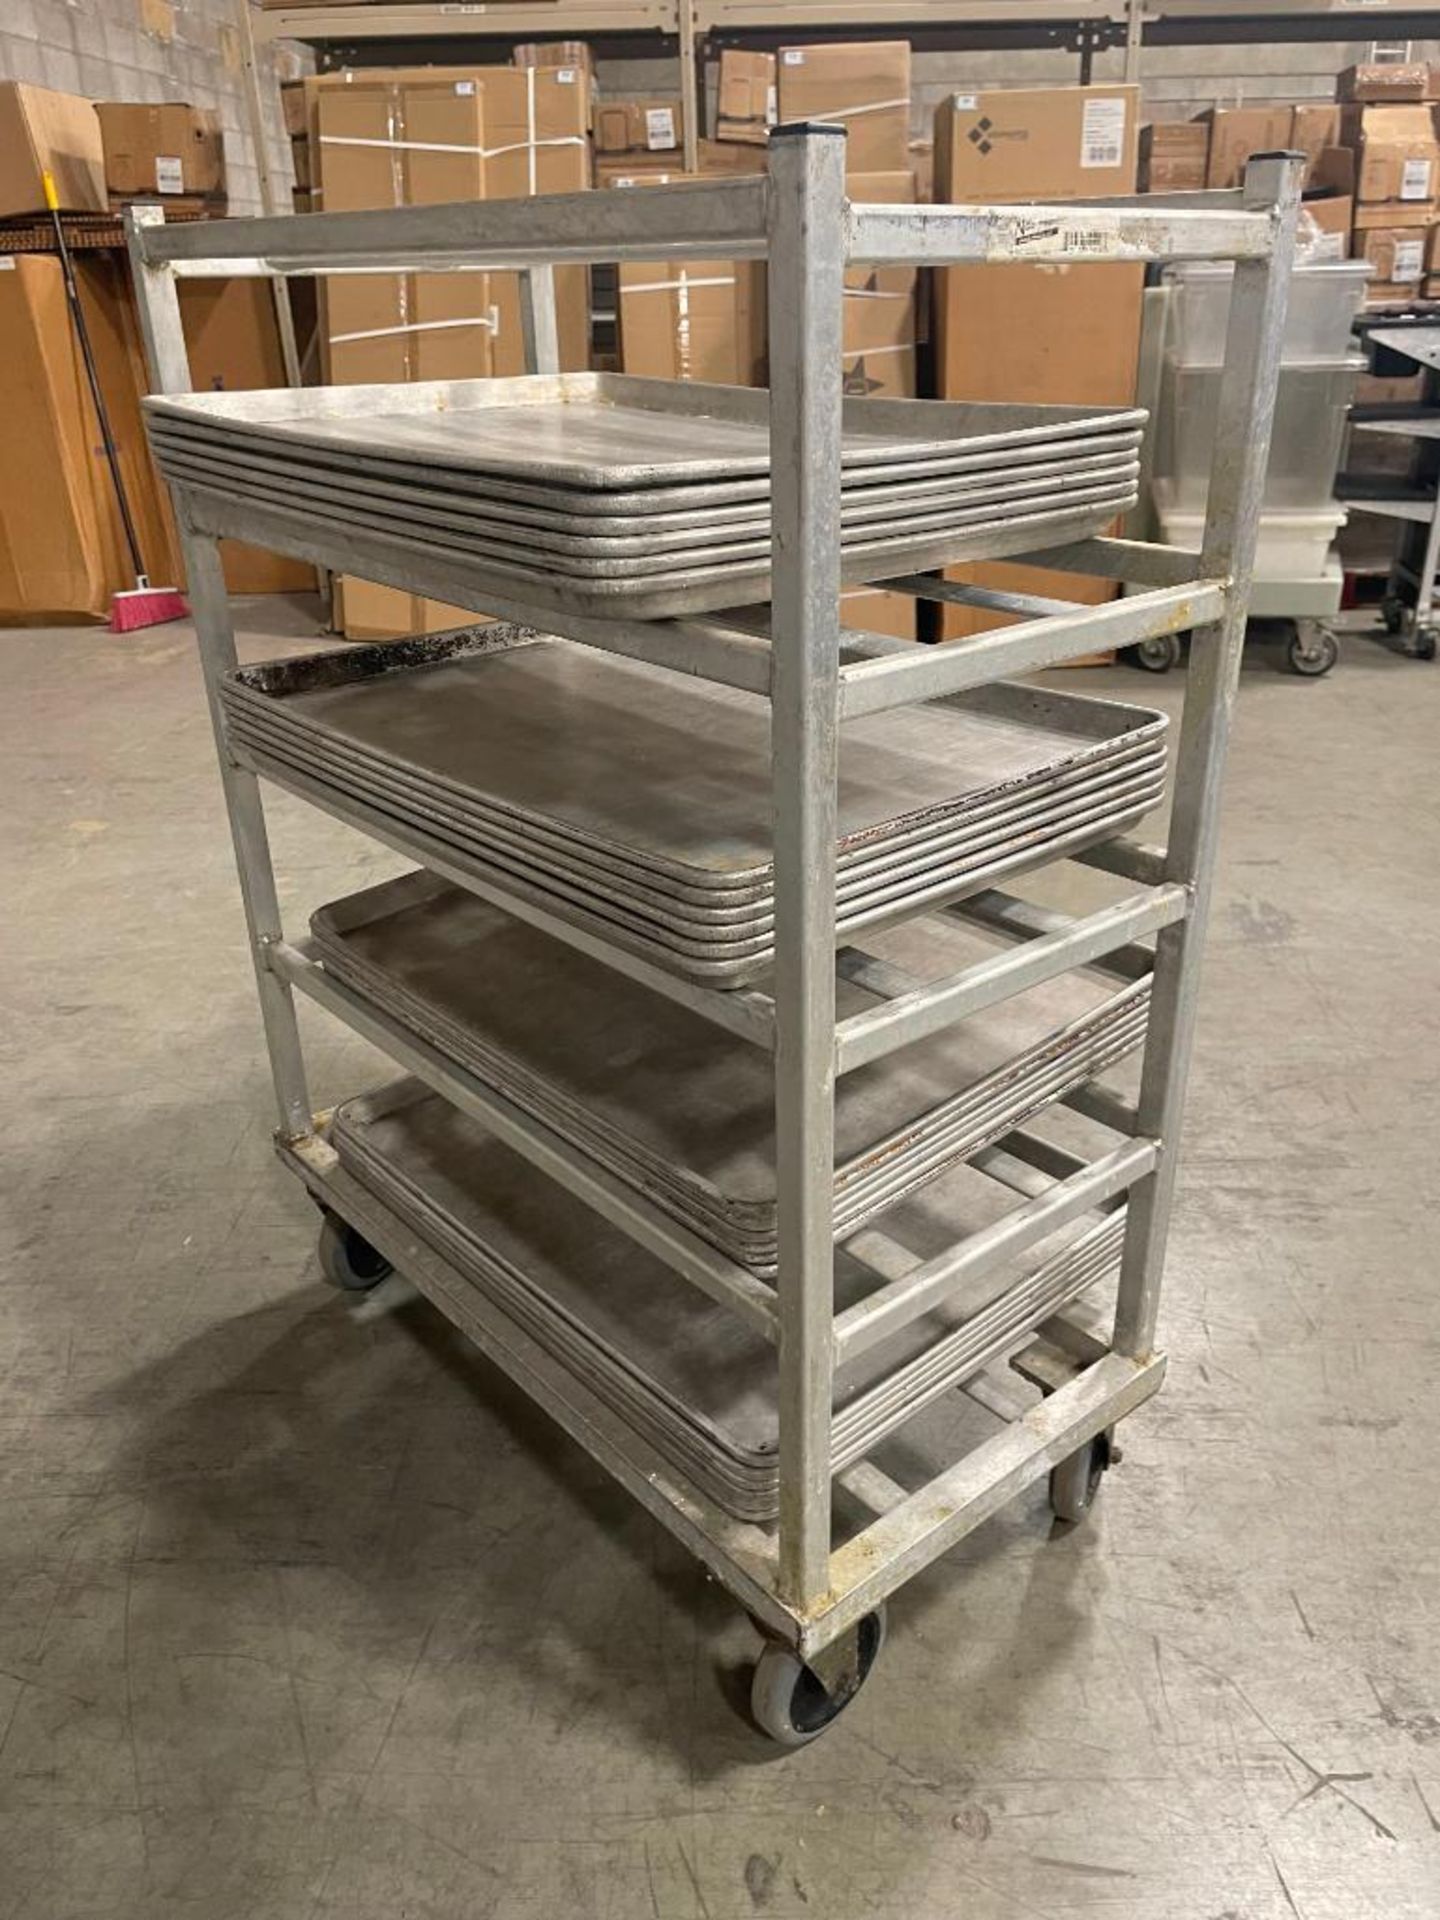 5 TIER STAINLESS STEEL MOBILE PLATTER CART WITH (24) FULL SIZE BUN PANS - Image 2 of 8